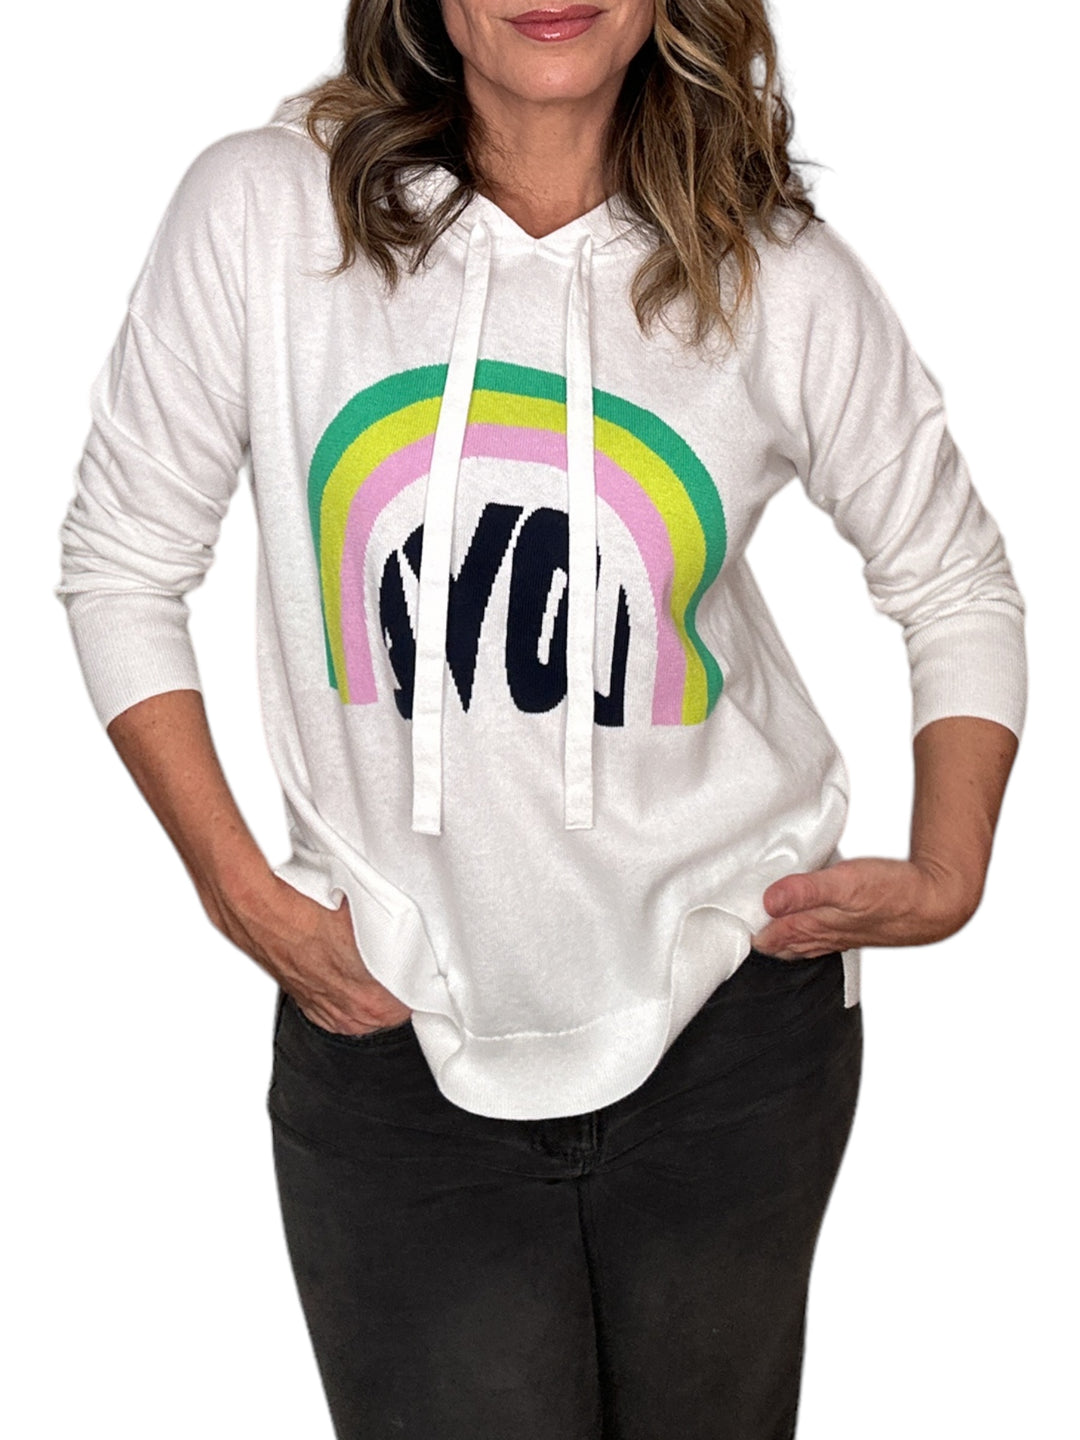 LOVE HOODIE SWEATER-WHITE - Kingfisher Road - Online Boutique